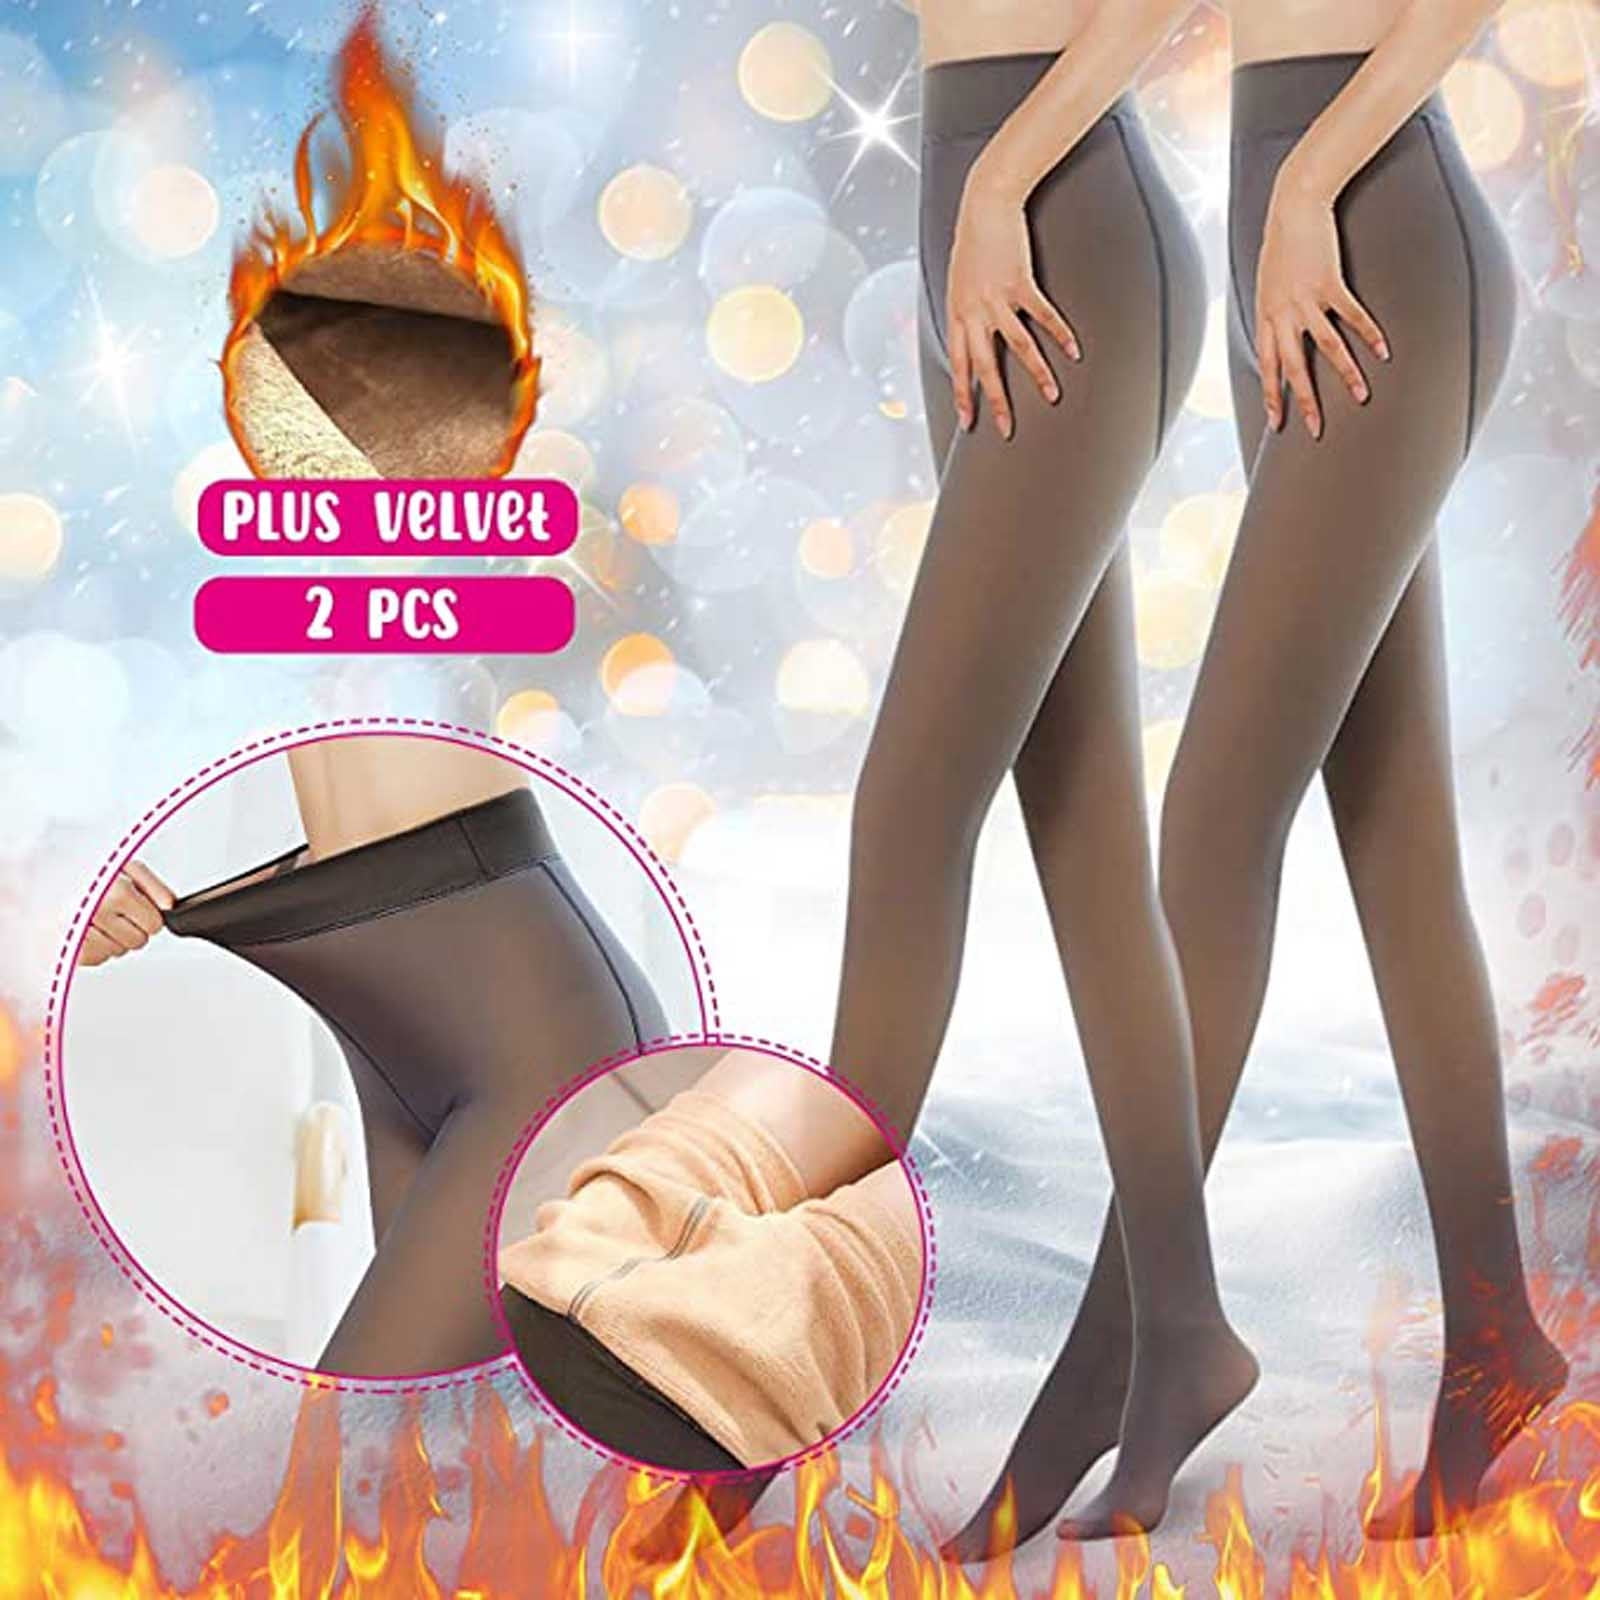 Chiccall Faux Sheertex Tights for Women, Winter Warm Fleece Lined Fake  Translucent Leggings Thermal Tights Slim Stretchy Pantyhose,on Clearance 